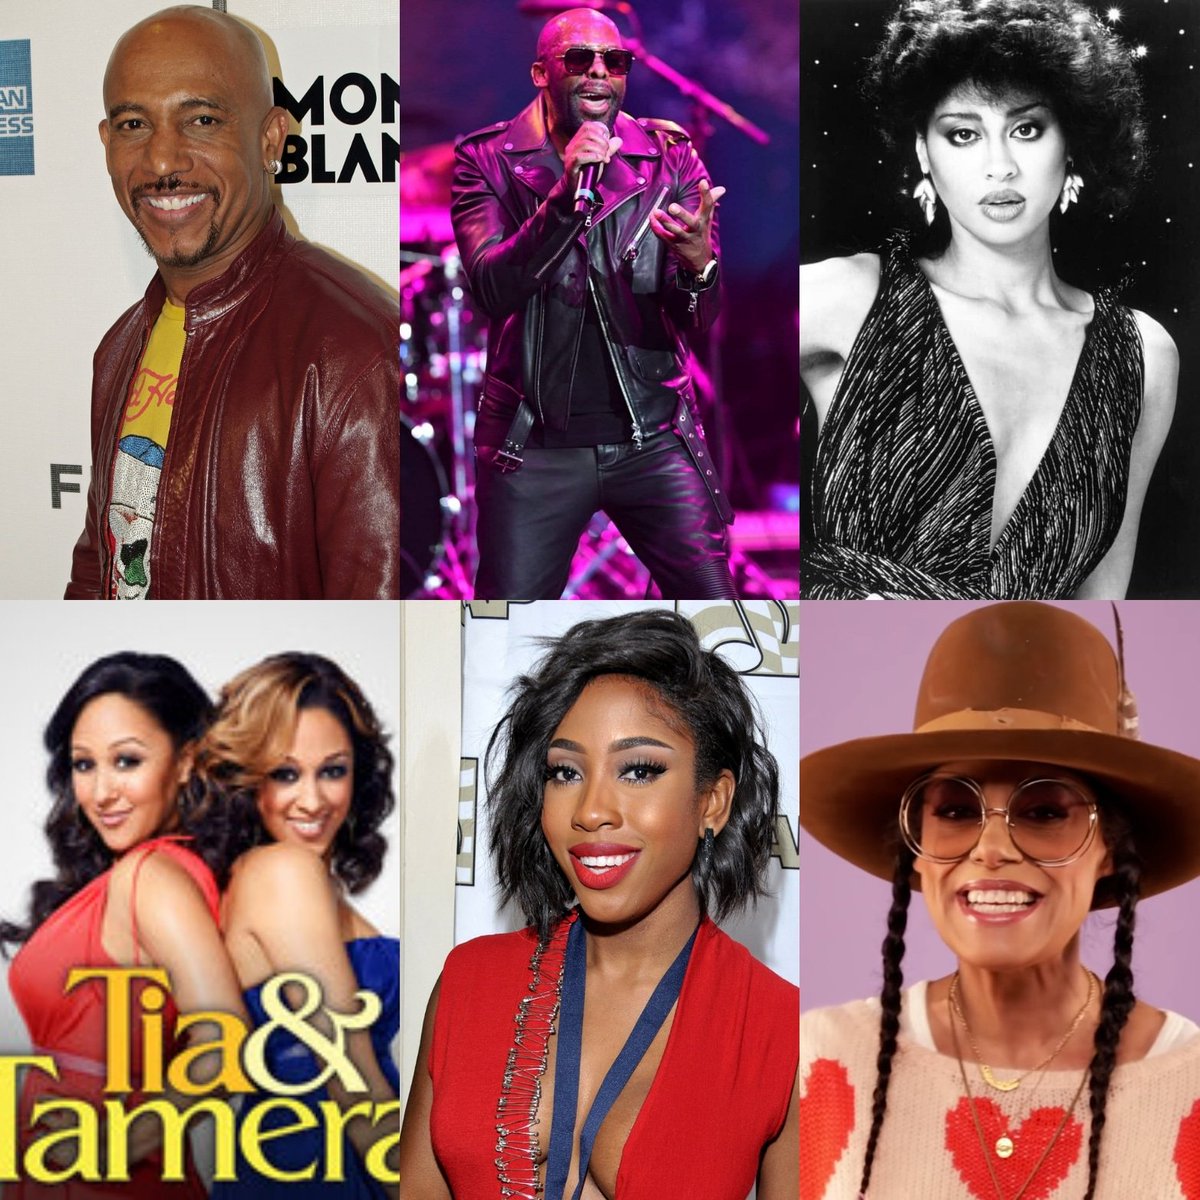 Montel Williams July3,1956 Joe Thomas July 5,1973 Phyllis Hyman July 6,1949-June 30,1995 Tia and Tamera Mowry July 6,1978 Sevyn Streeter July 7,1986 and Cree Summer July 7,1969 Happy Belated Birthday to these Cancer June 22-July 22. https://t.co/EjEkhliPPB